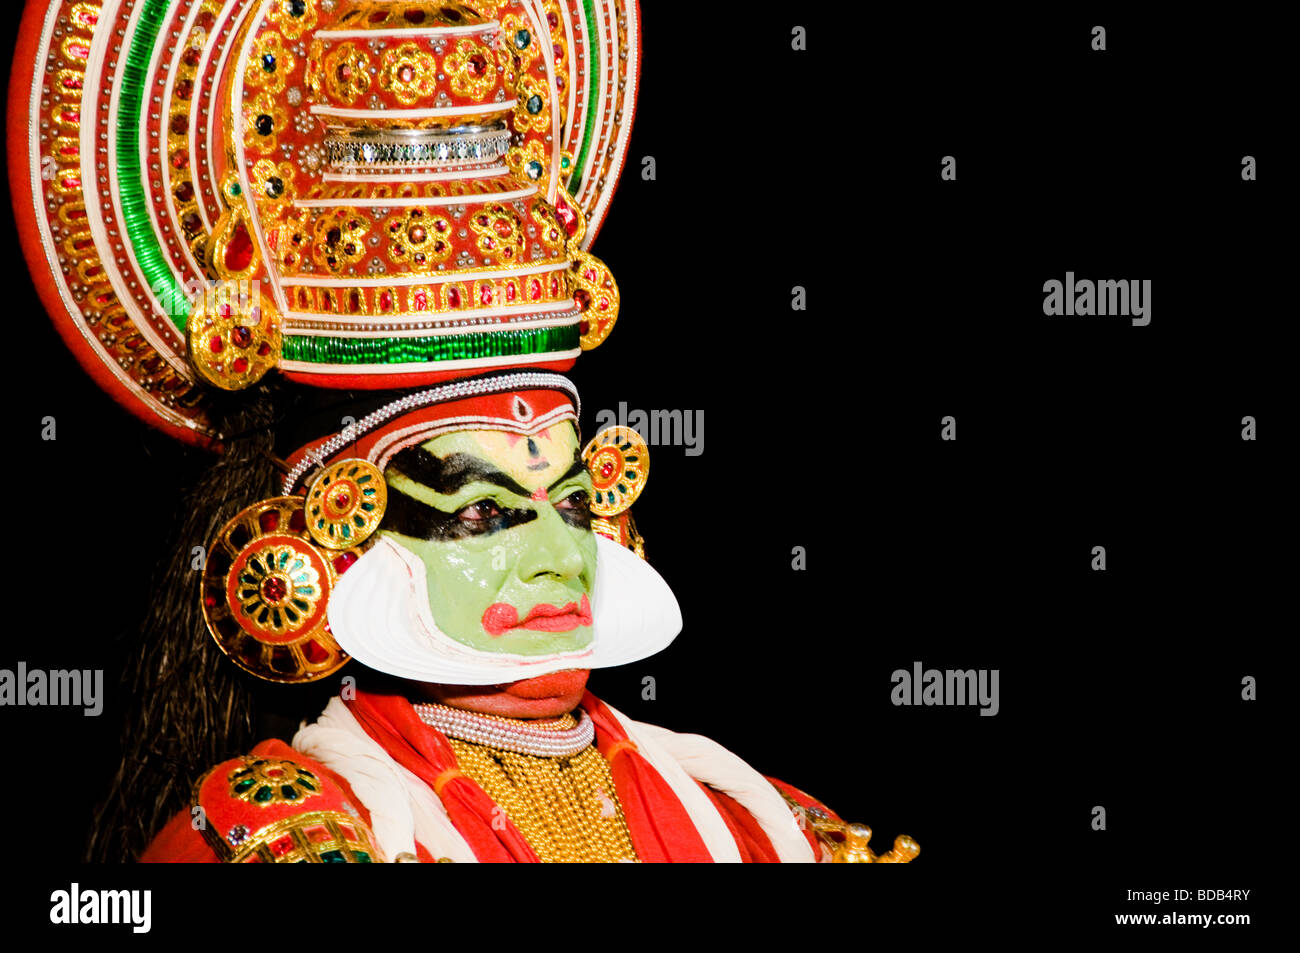 India dance performer on stage performing kathakali Stock Photo